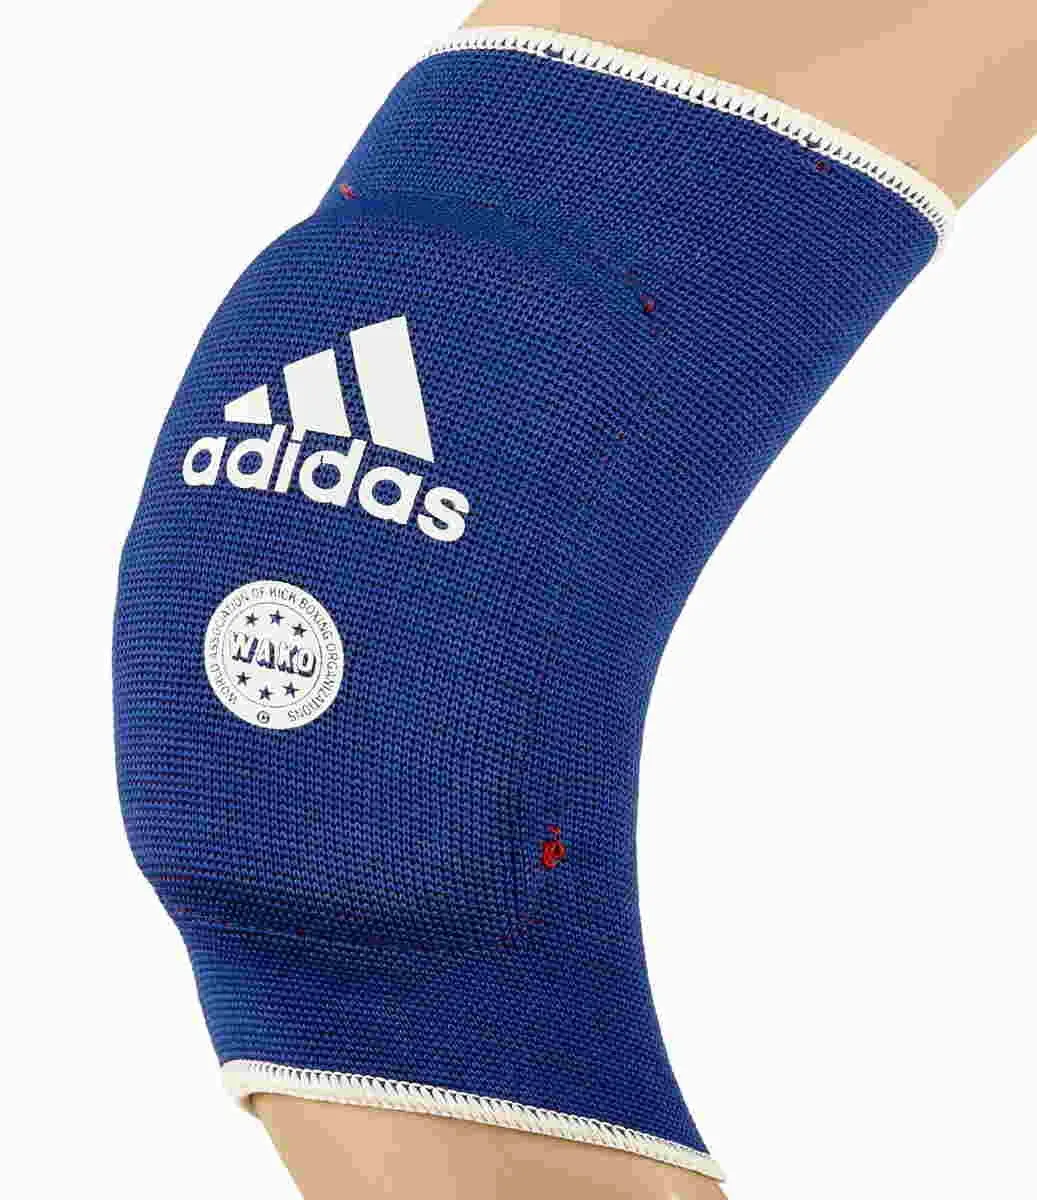 adidas Reversible Elbow Pads WAKO red|blue